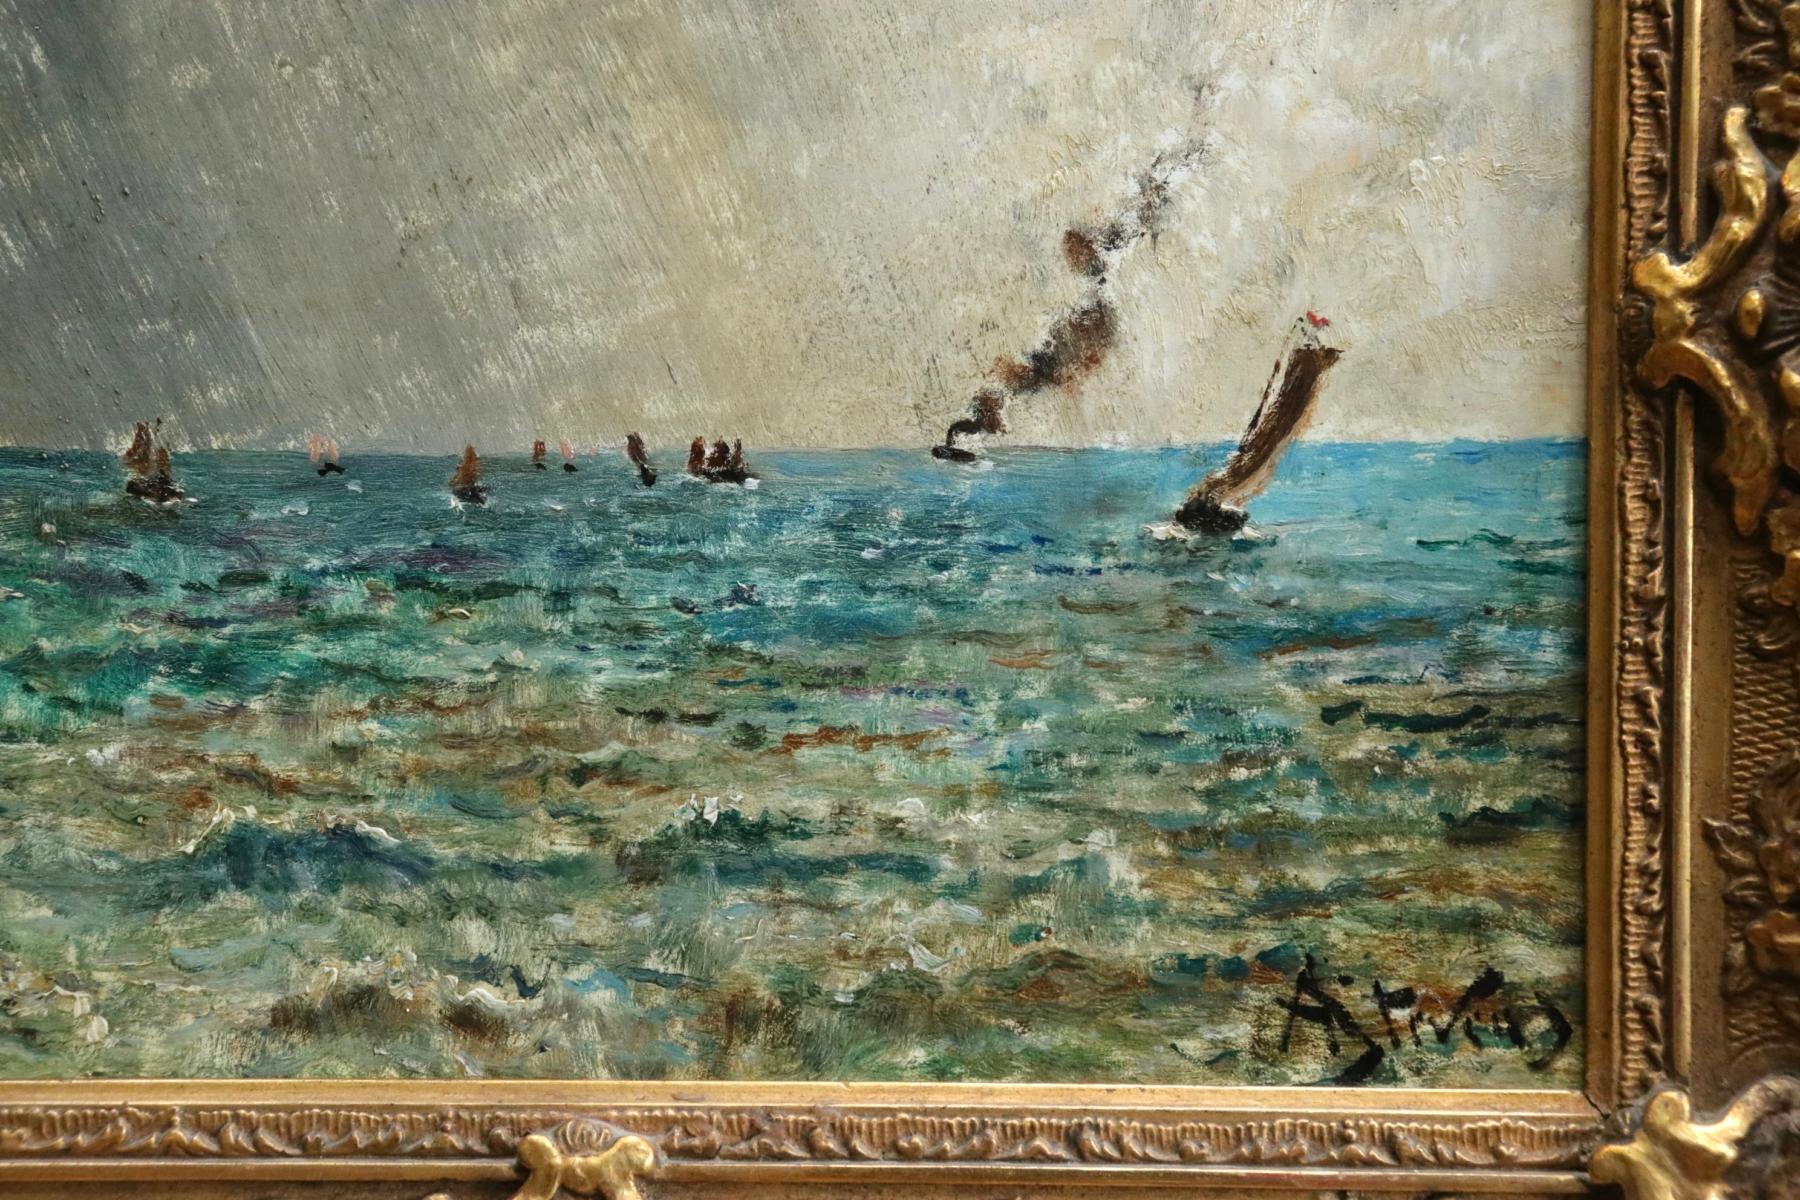 Steamers off the Coast - 19th Century Oil, Boats in Seascape by Alfred Stevens 1